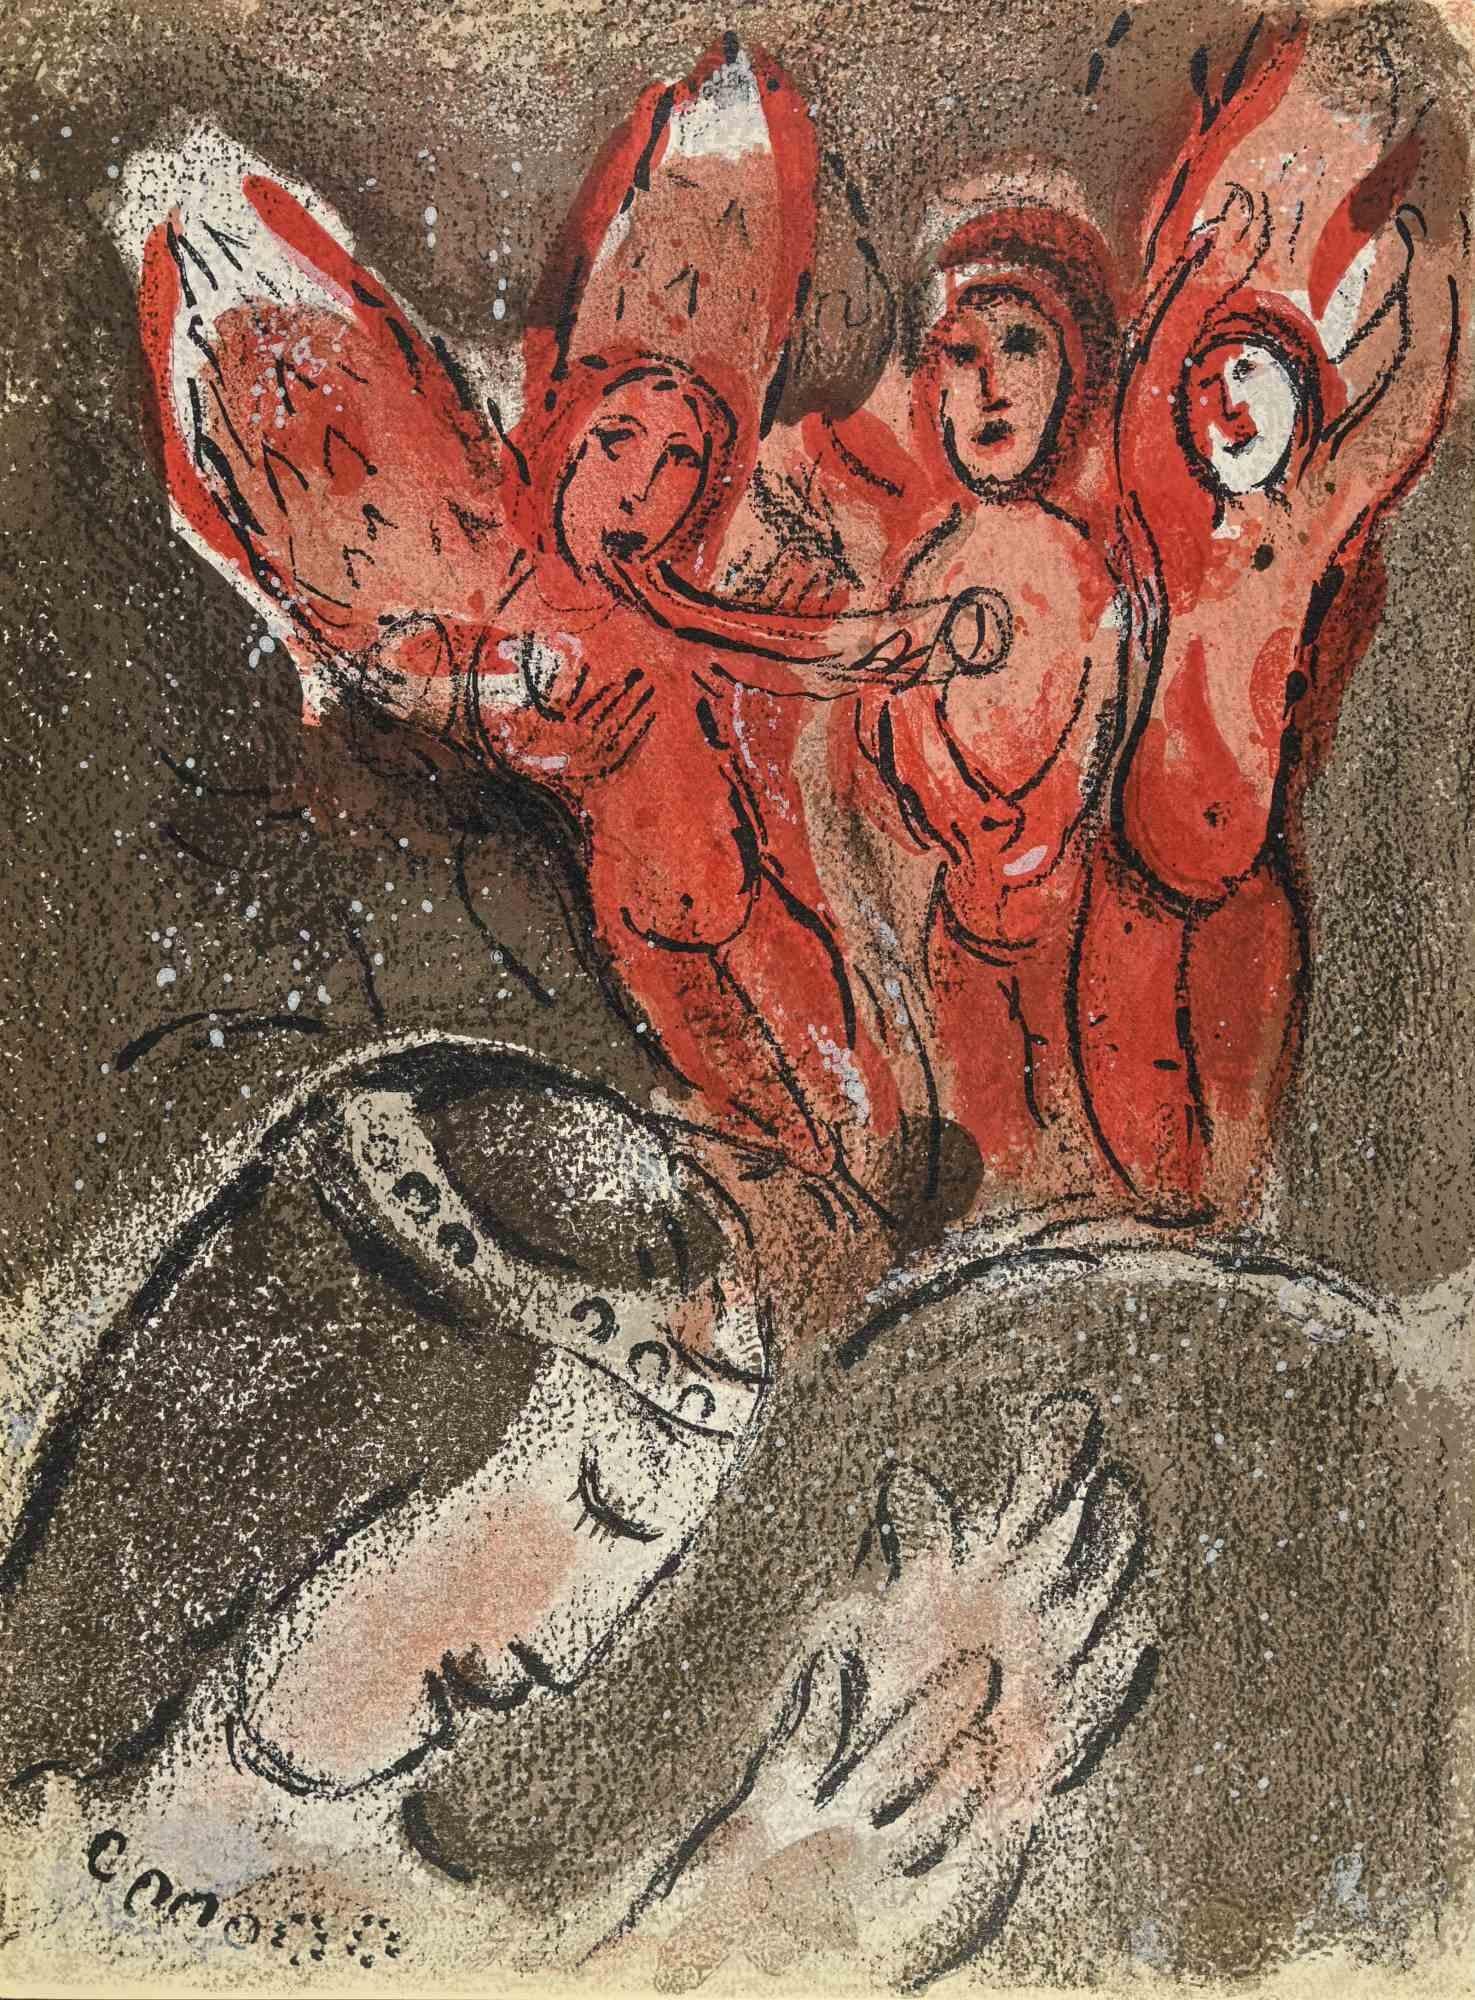 Sarah and the angels is a an artwork from the Series "The Bible", by Marc Chagall in 1960.
Mixed colored lithograph on brown-toned paper, no signature.
Edition of 6500 unsigned lithographs. Printed by Mourlot and published by Tériade, Paris.
Ref.